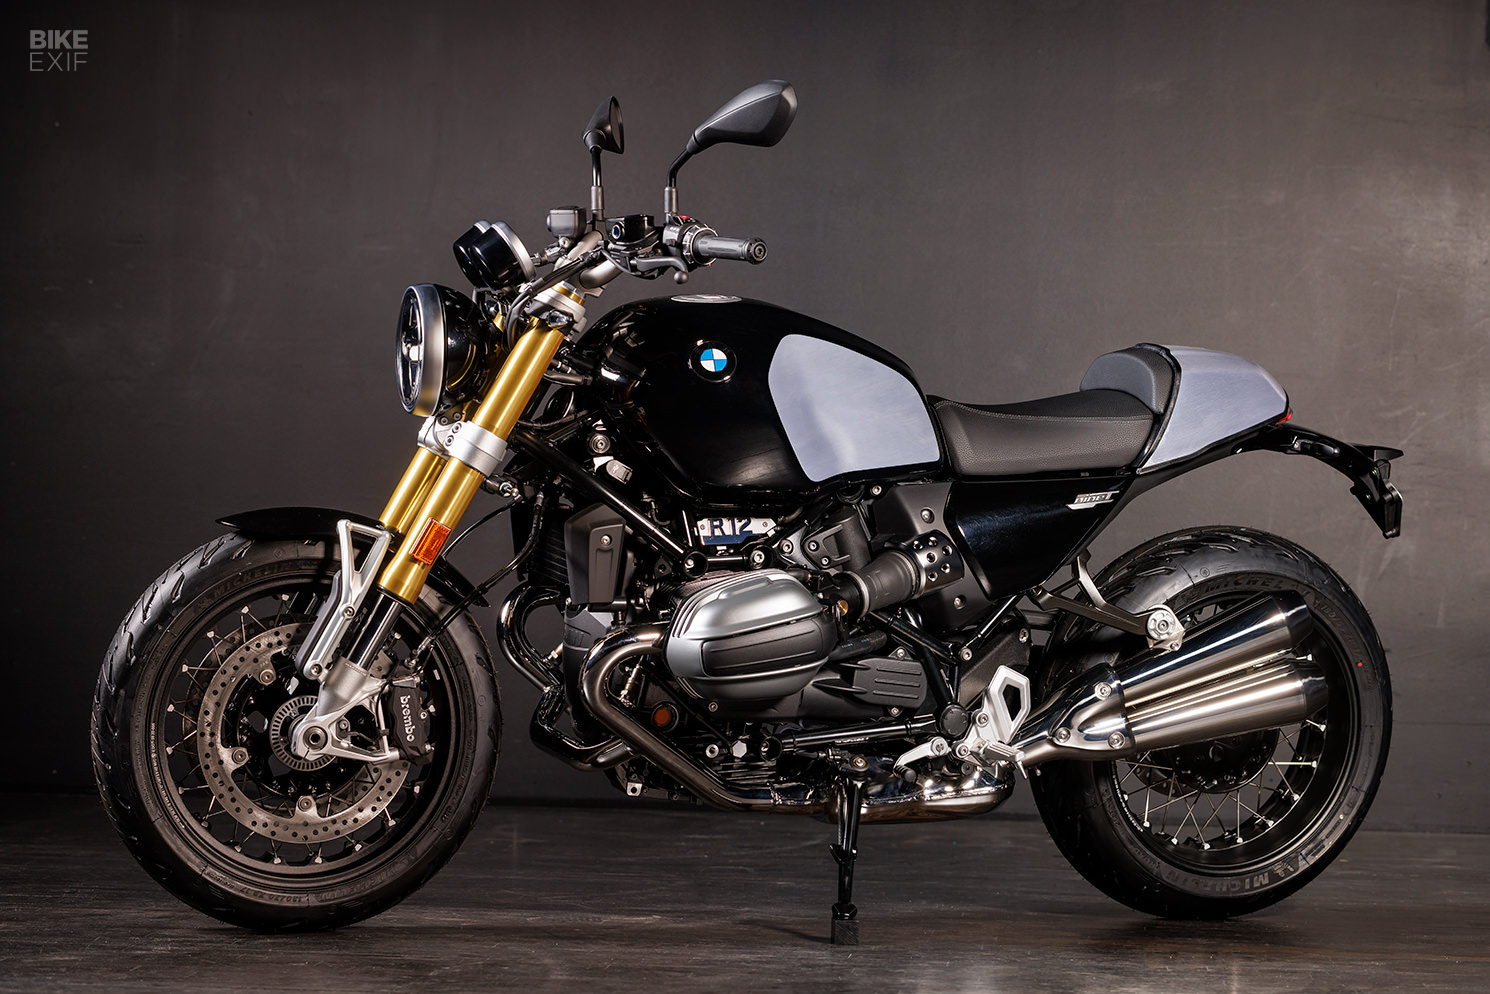 The new BMW R 12 nineT roadster